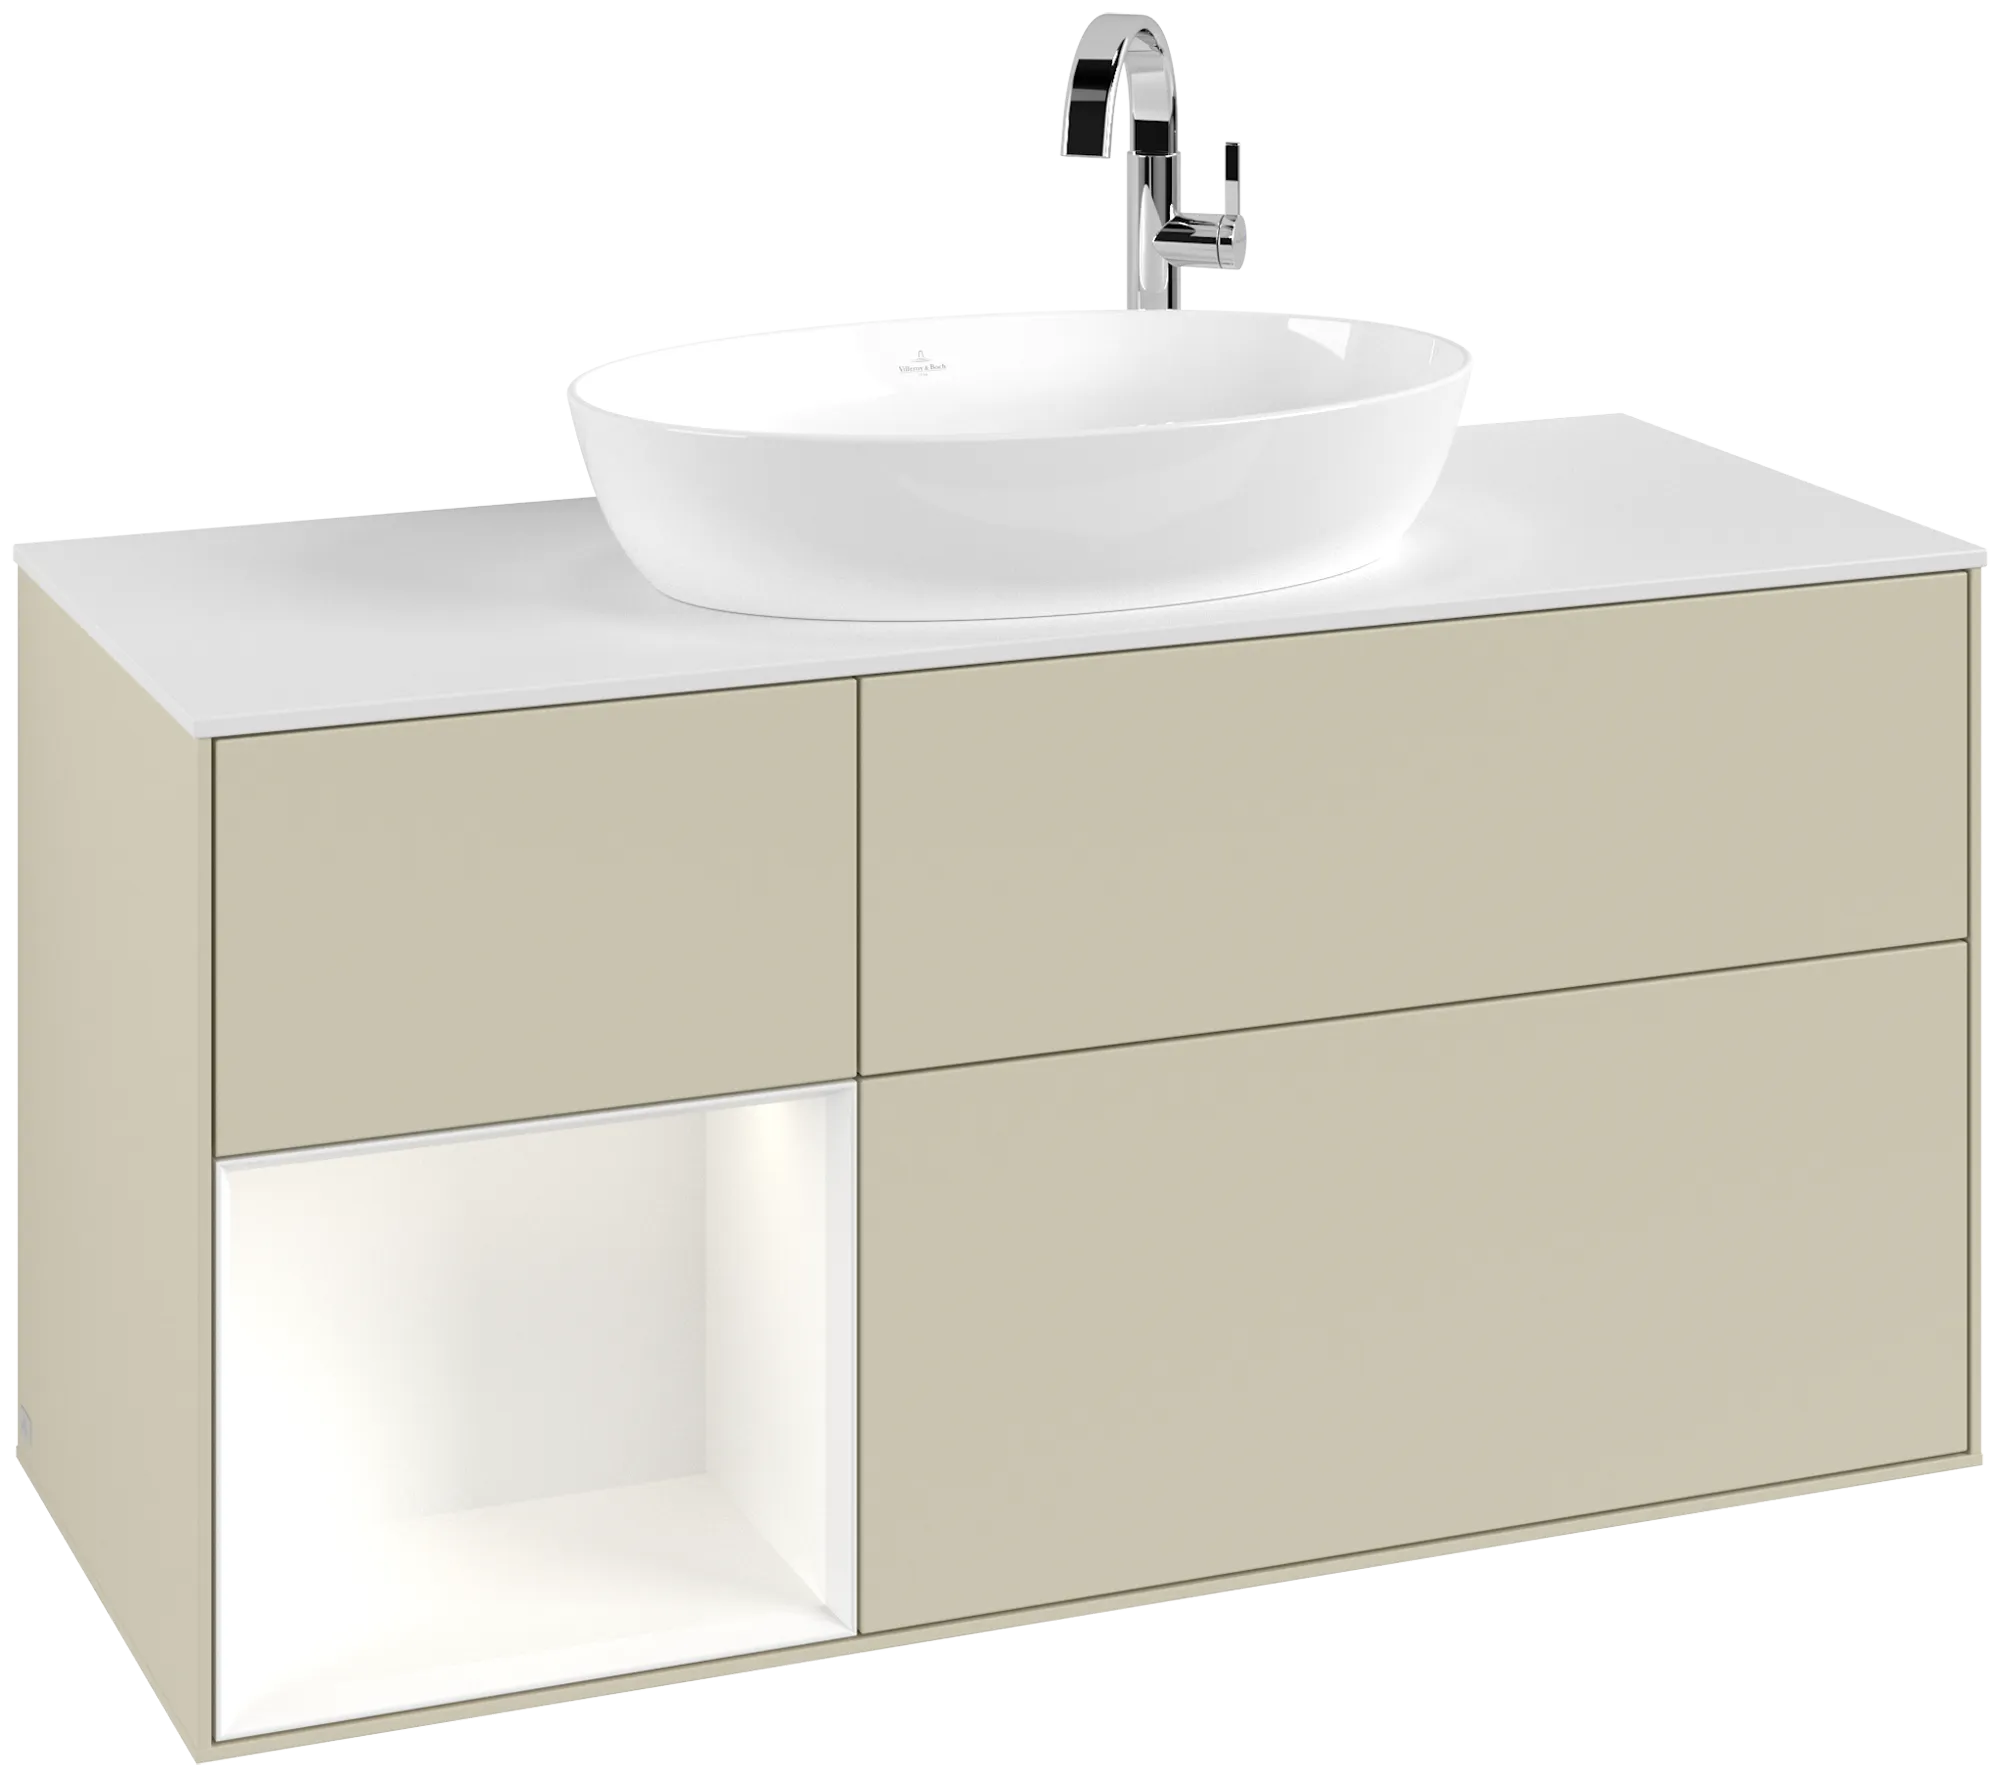 Picture of VILLEROY BOCH Finion Vanity unit, with lighting, 3 pull-out compartments, 1200 x 603 x 501 mm, Silk Grey Matt Lacquer / White Matt Lacquer / Glass White Matt #G941MTHJ